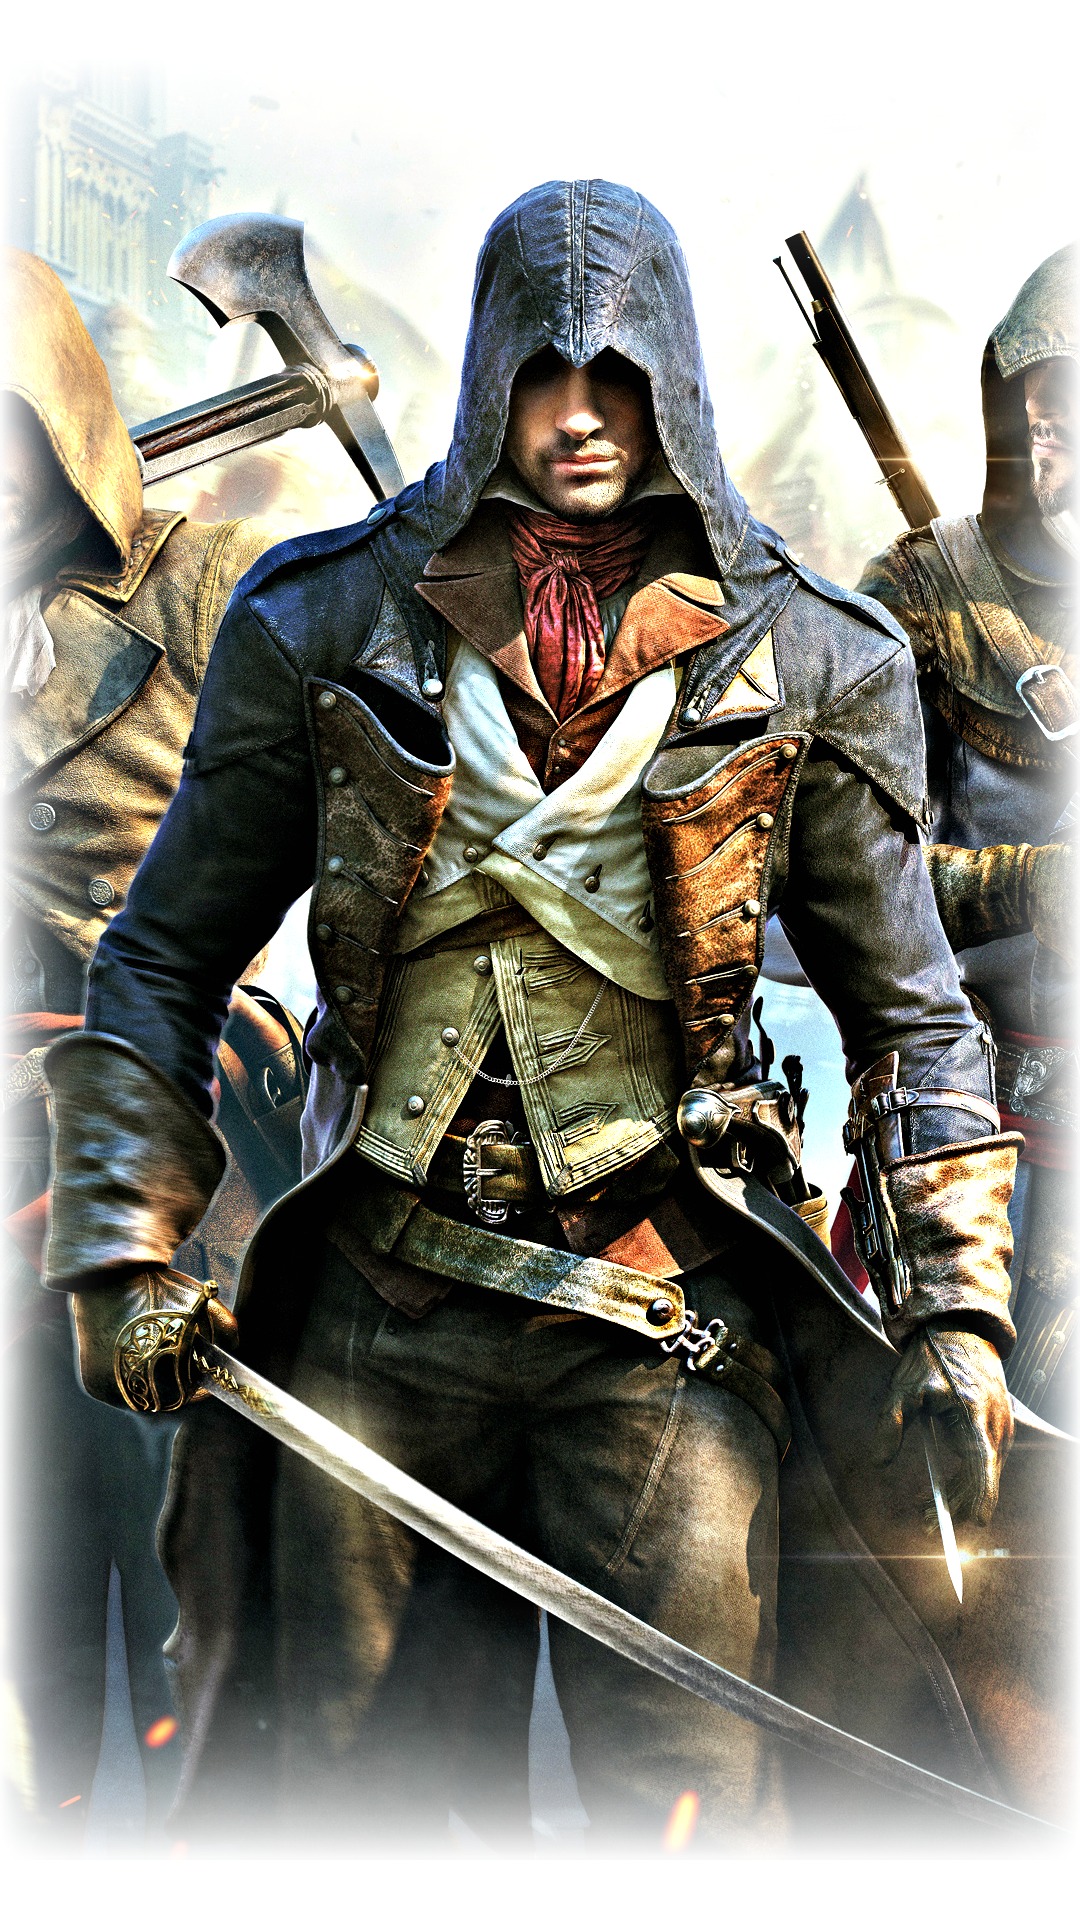 Free Assassin S Creed Image For Iphone - HD Wallpaper 